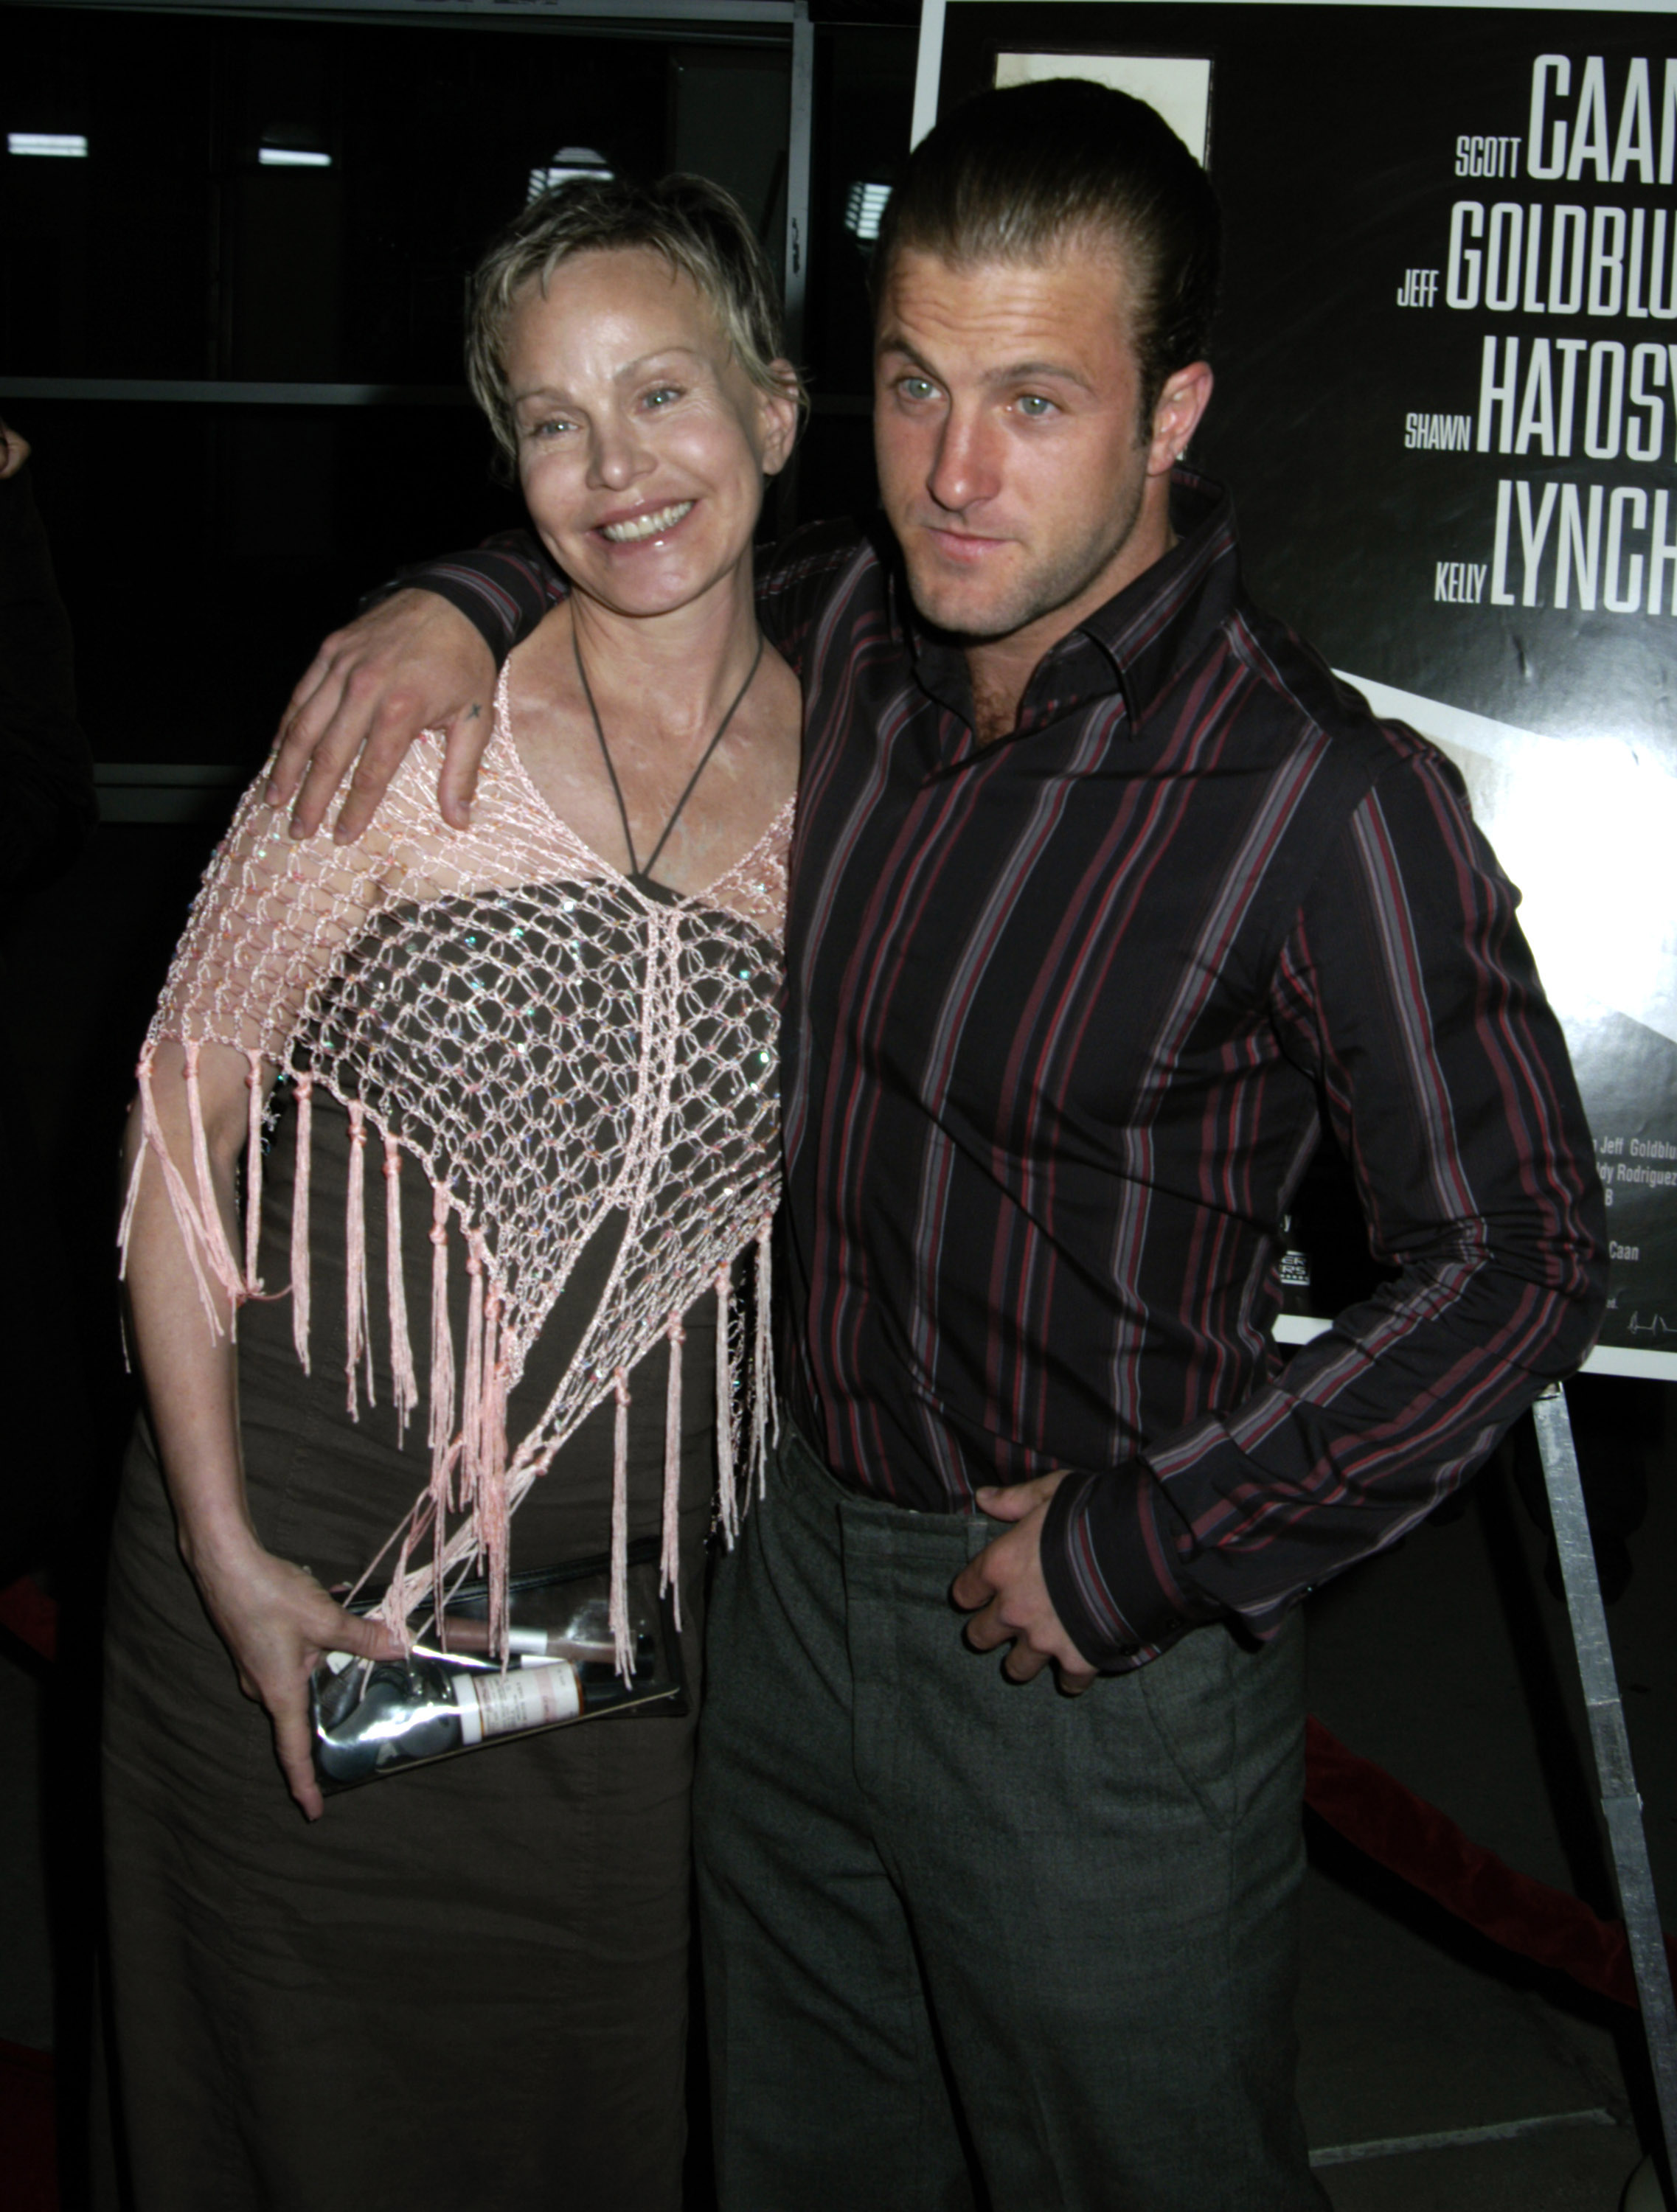 Sheila Ryan and Scott Caan pose at the "Dallas 362" Los Angeles premiere on May 4, 2005, in Los Angeles, California. | Source: Getty Images